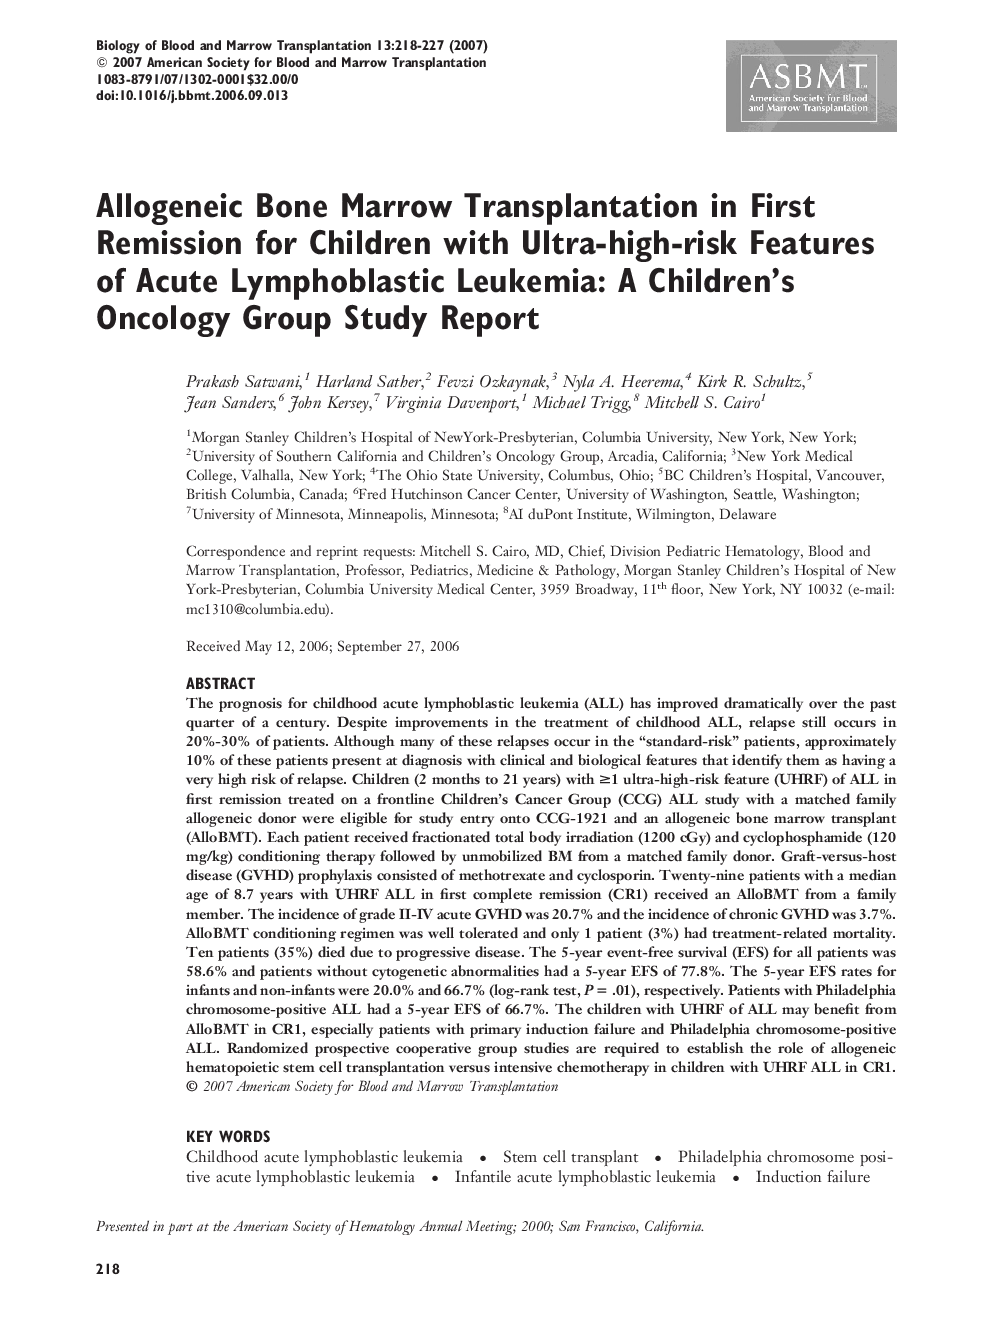 Allogeneic Bone Marrow Transplantation in First Remission for Children with Ultra-high-risk Features of Acute Lymphoblastic Leukemia: A Children’s Oncology Group Study Report